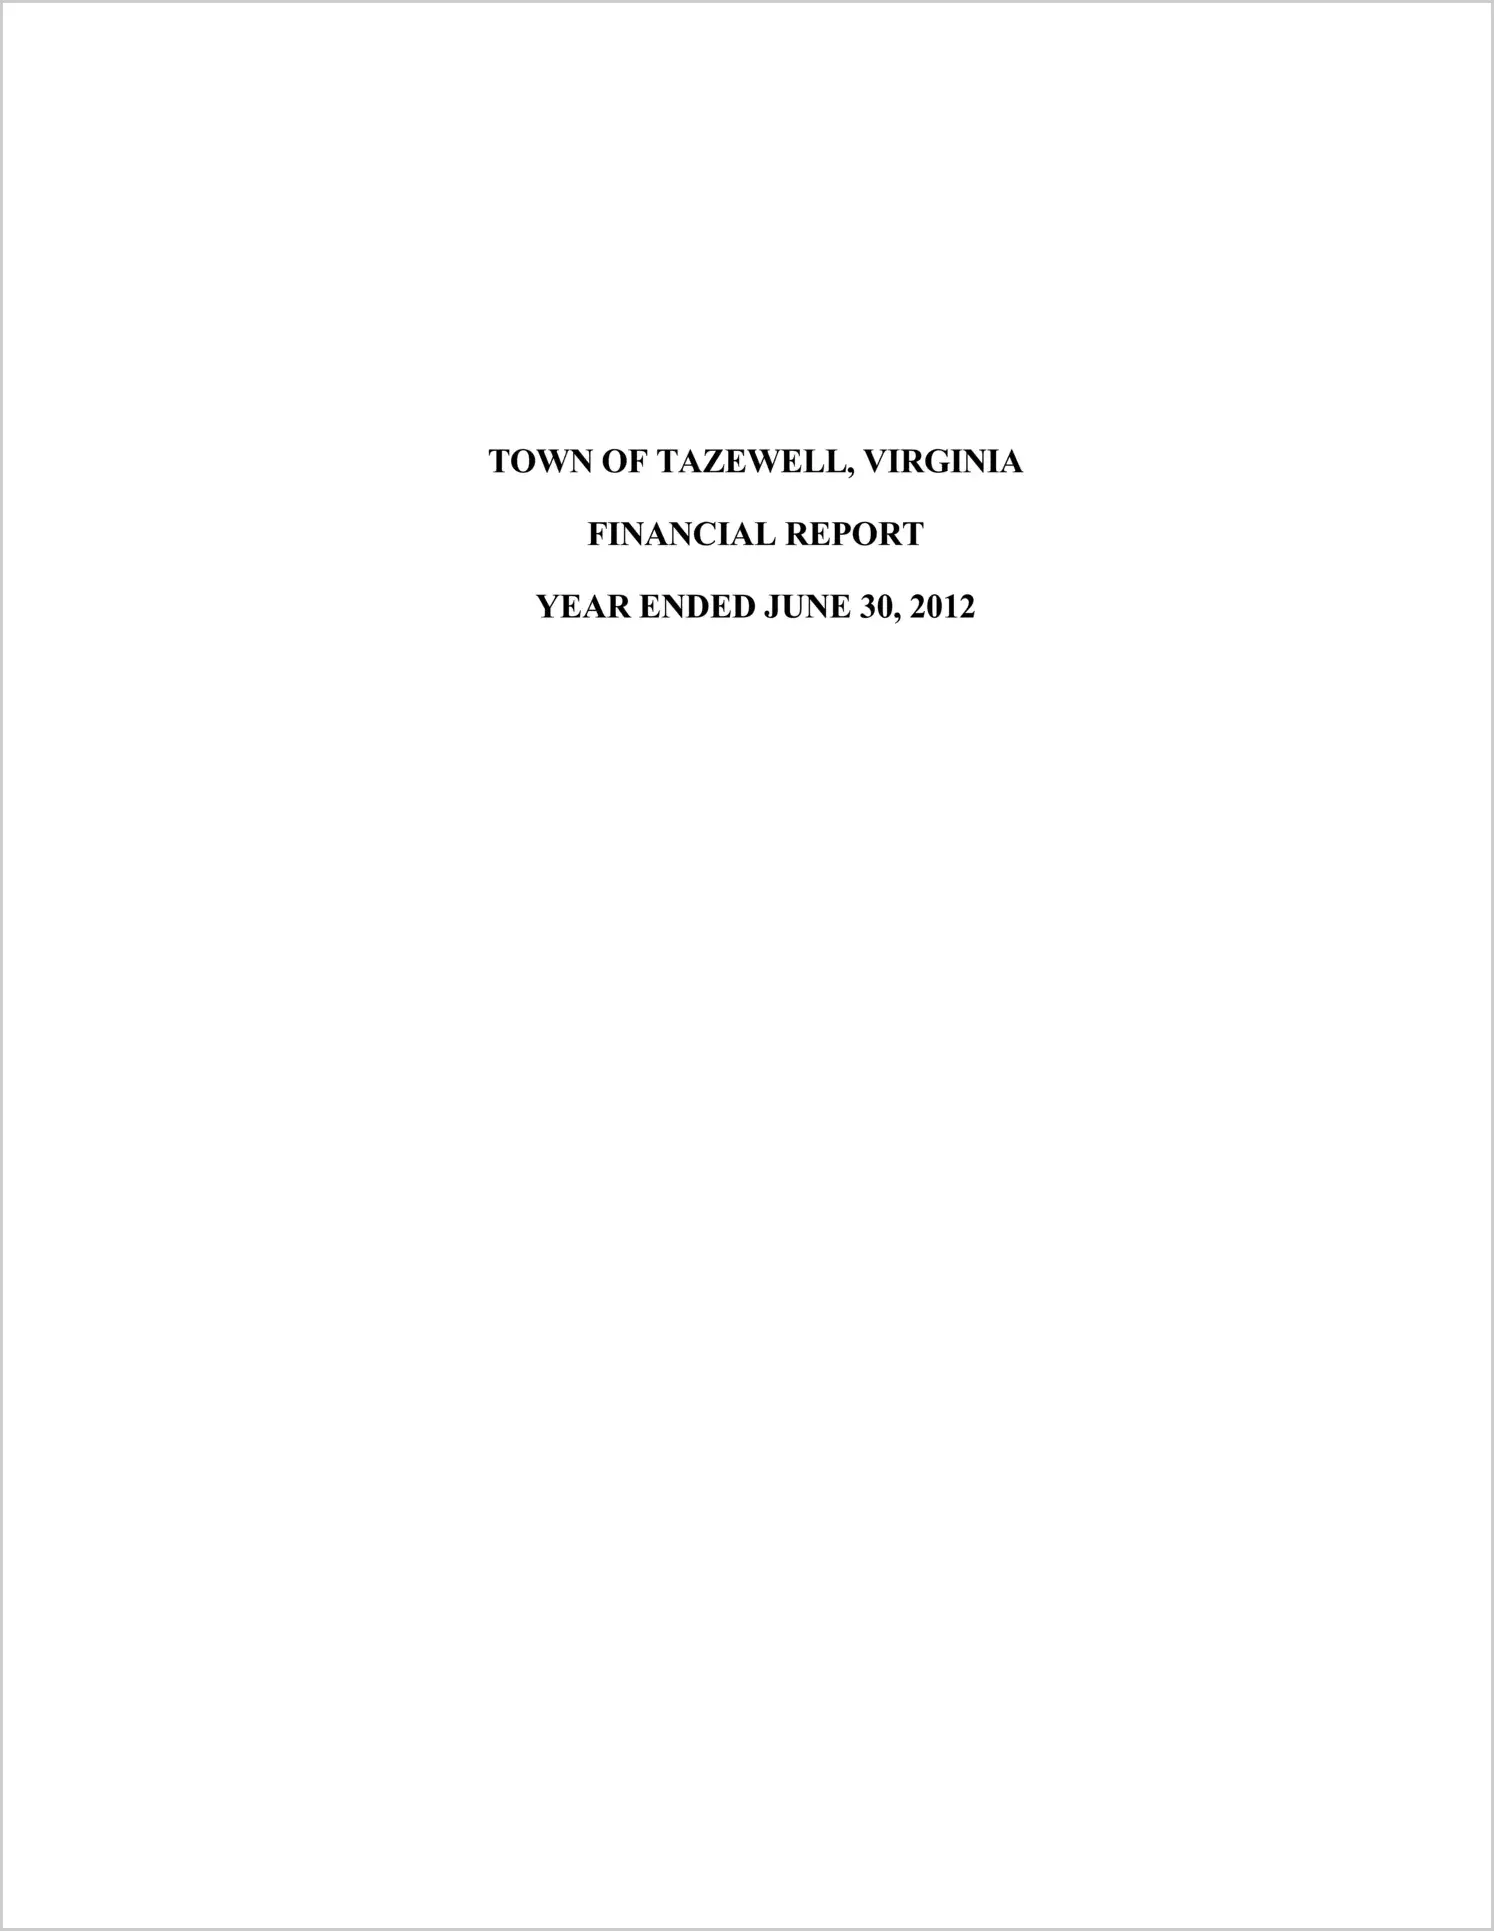 2012 Annual Financial Report for Town of Tazewell